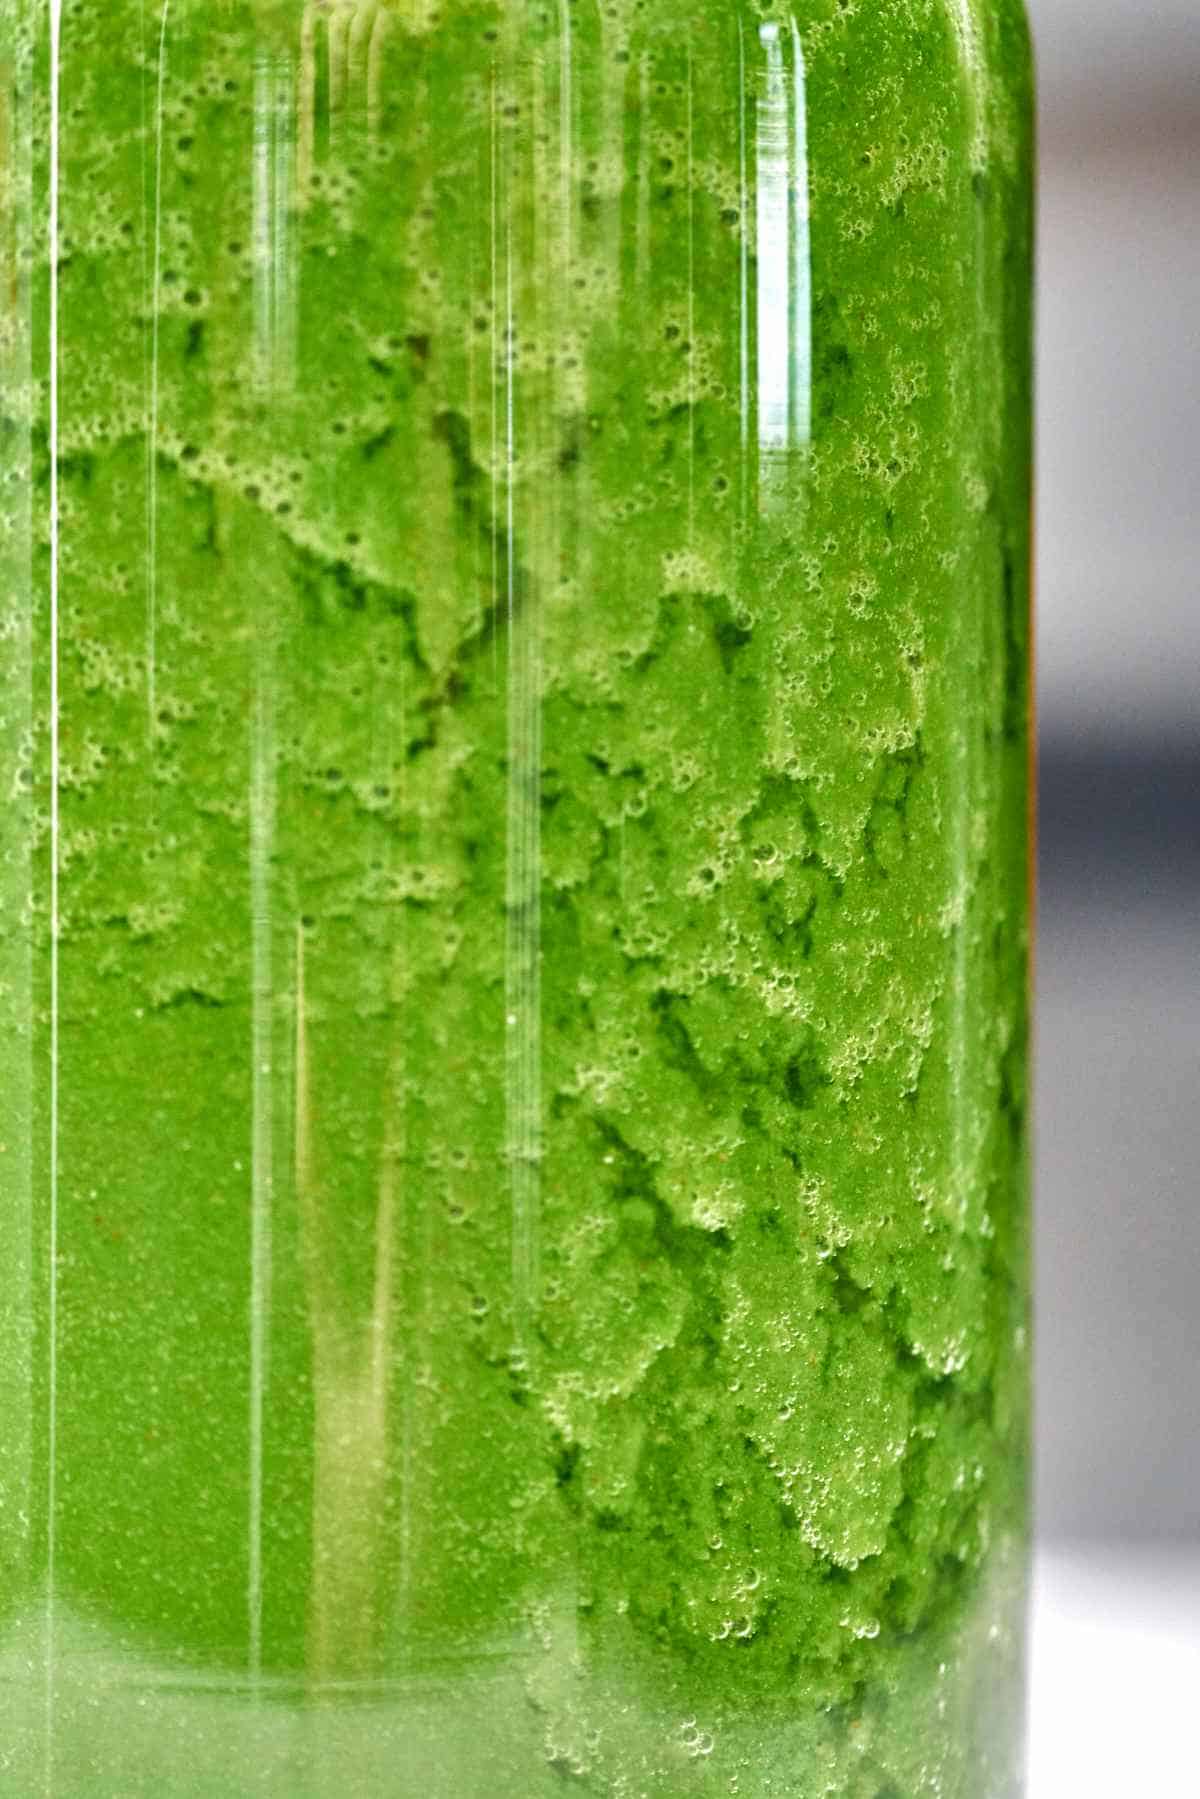 An extreme close up of green juice in a tall glass.